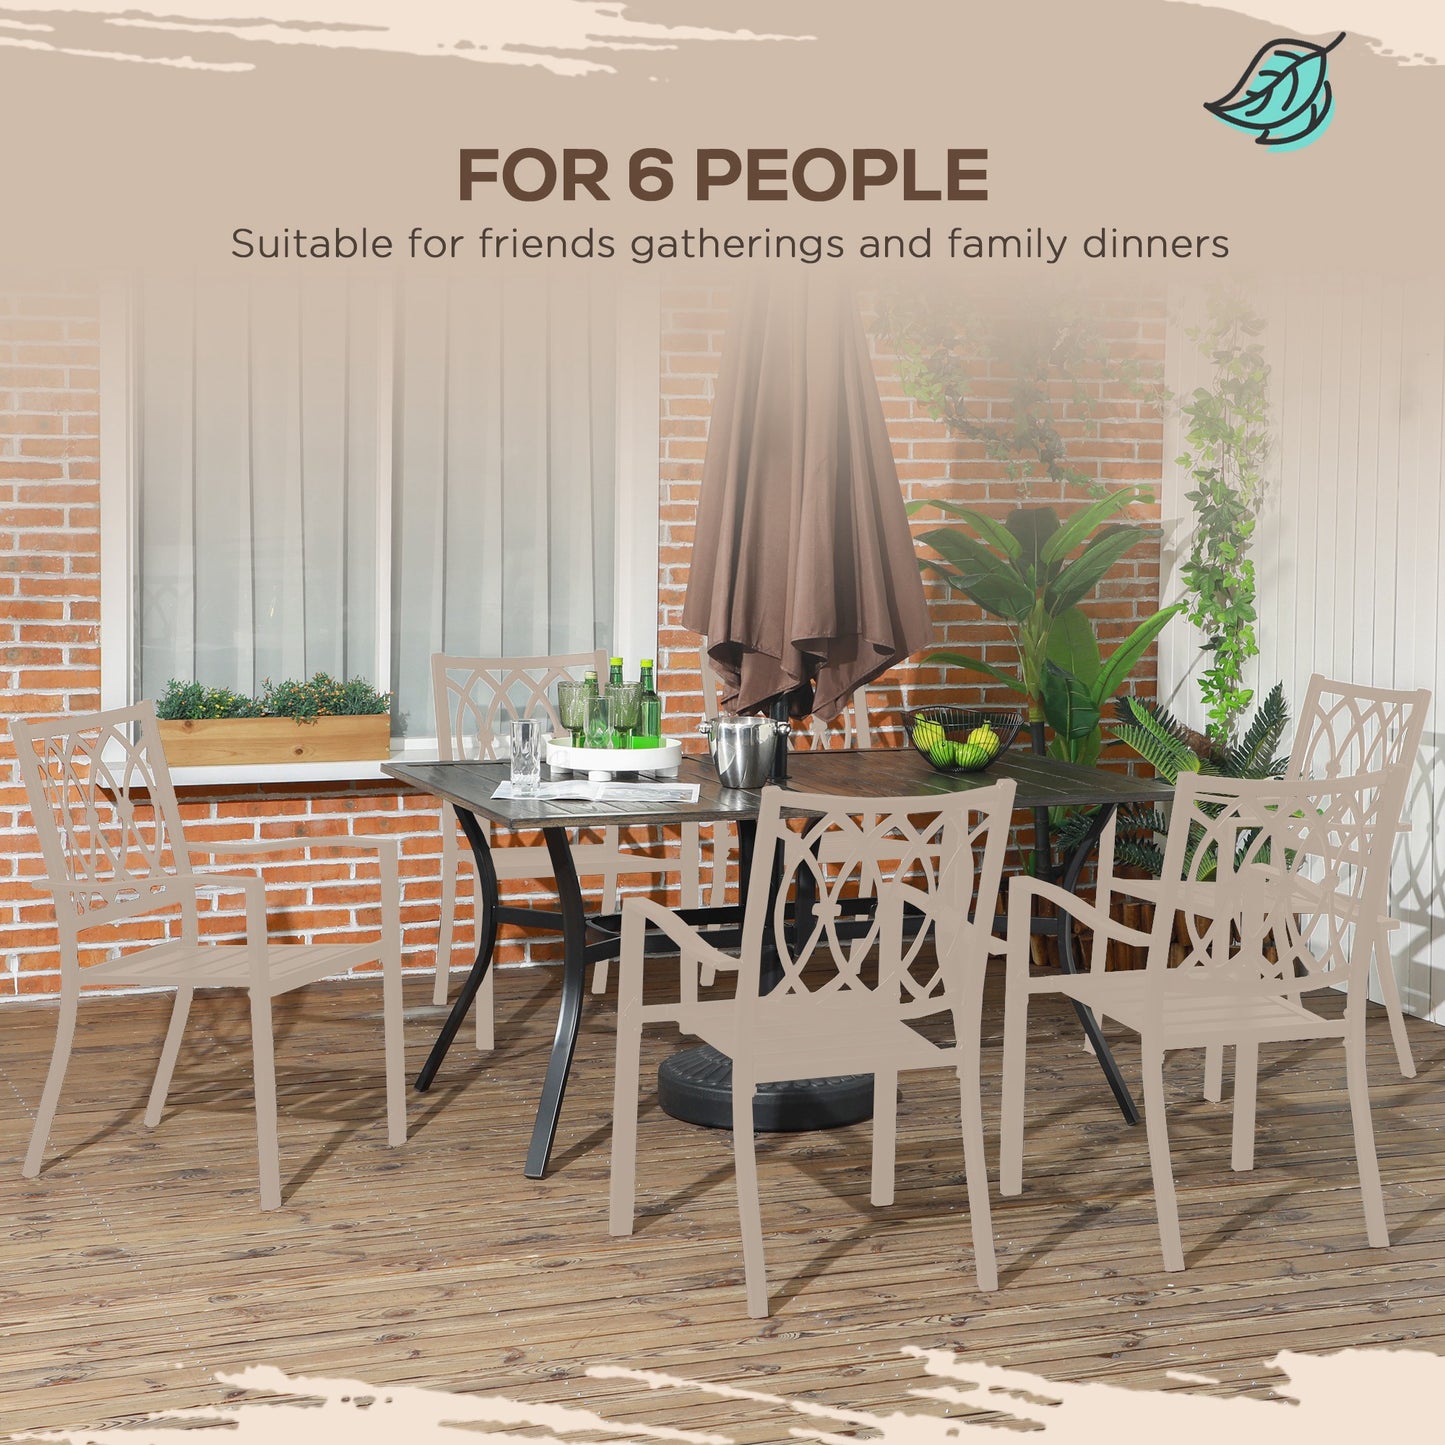 Outsunny Six-Seater Steel Garden Table with ⌀41mm Parasol Hole - Wood-Effect